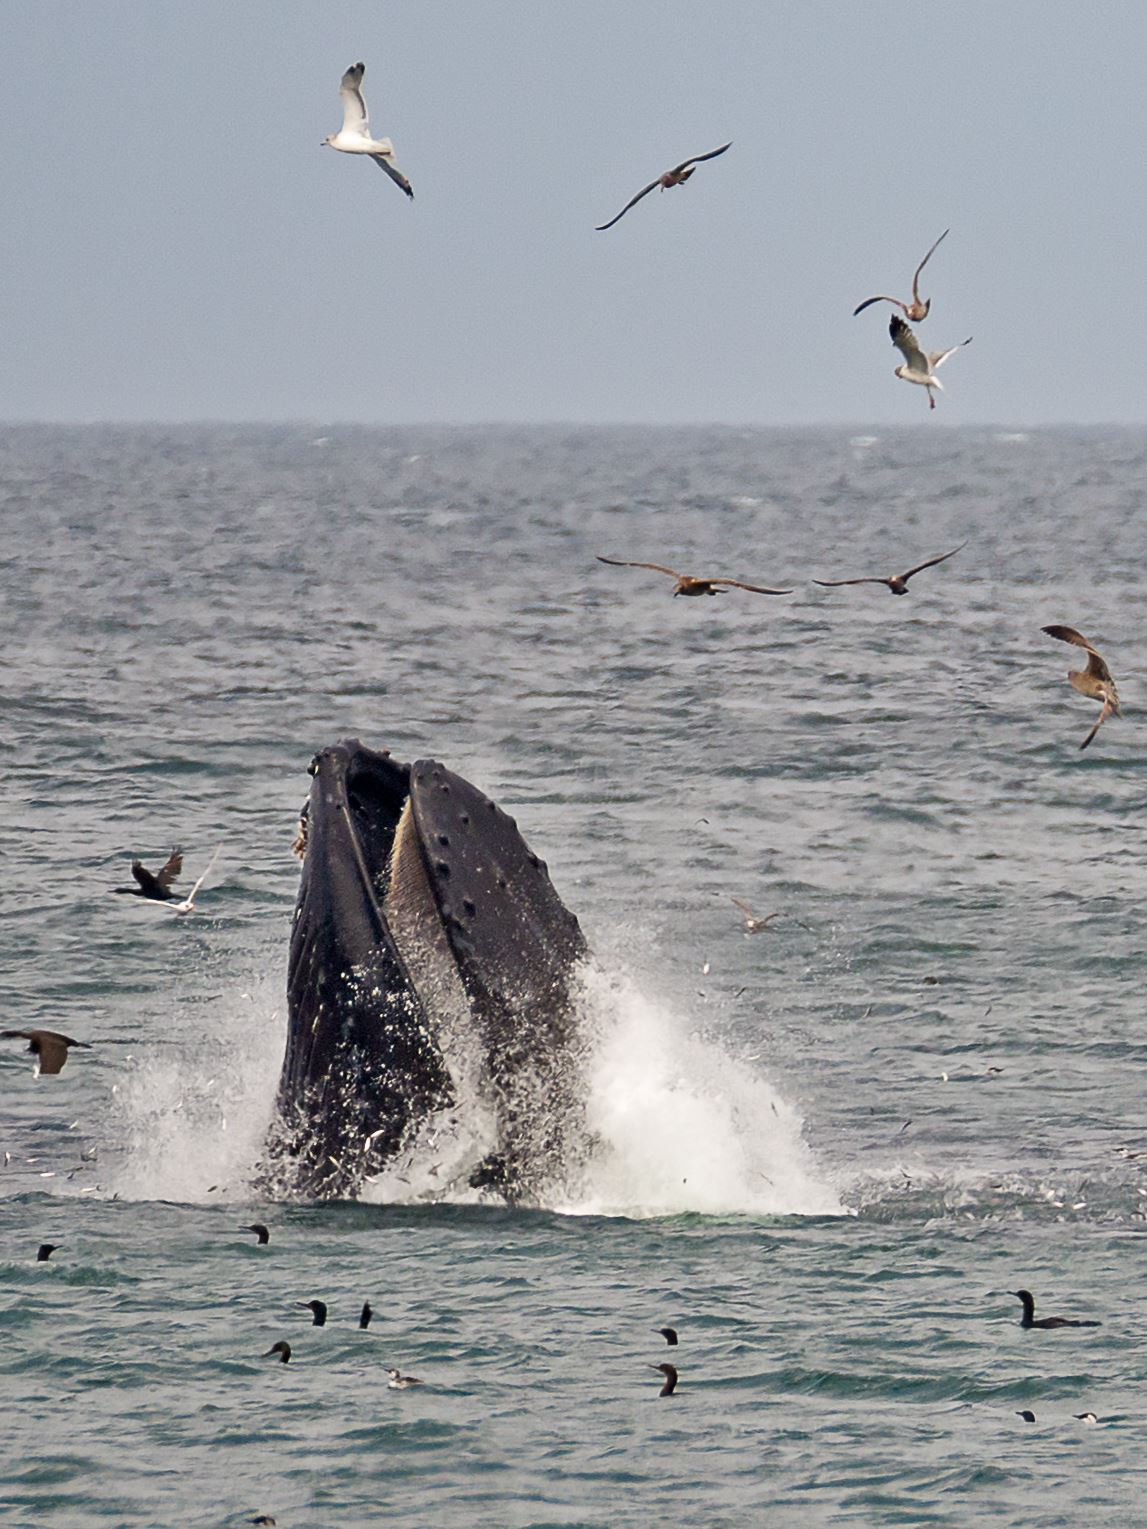 Gulp! Humpback whale lunge feeding while seabirds fly overhead by Denise Buckley Crawford